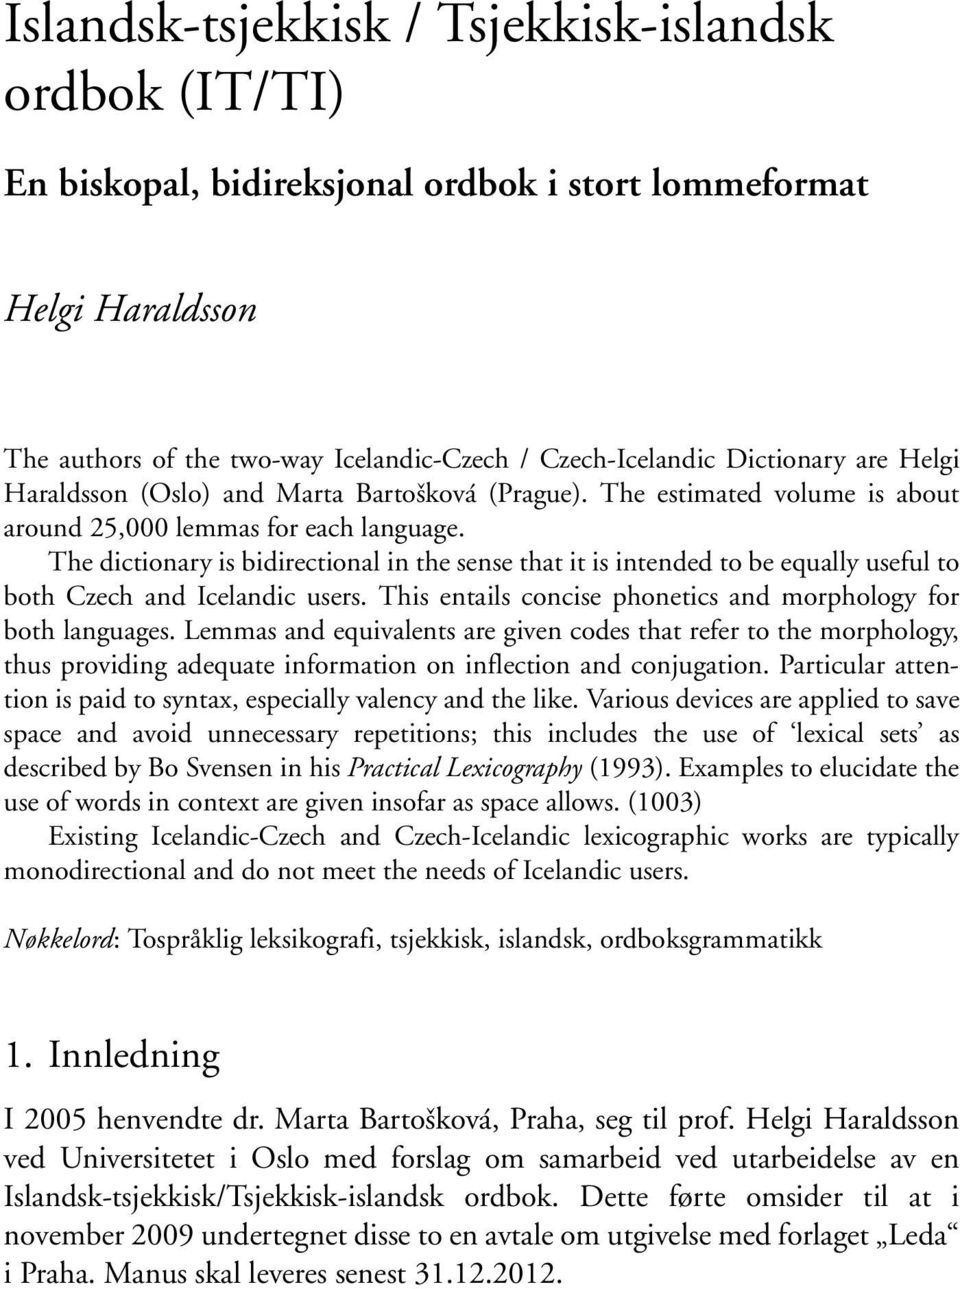 The dictionary is bidirectional in the sense that it is intended to be equally useful to both Czech and Icelandic users. This entails concise phonetics and morphology for both languages.